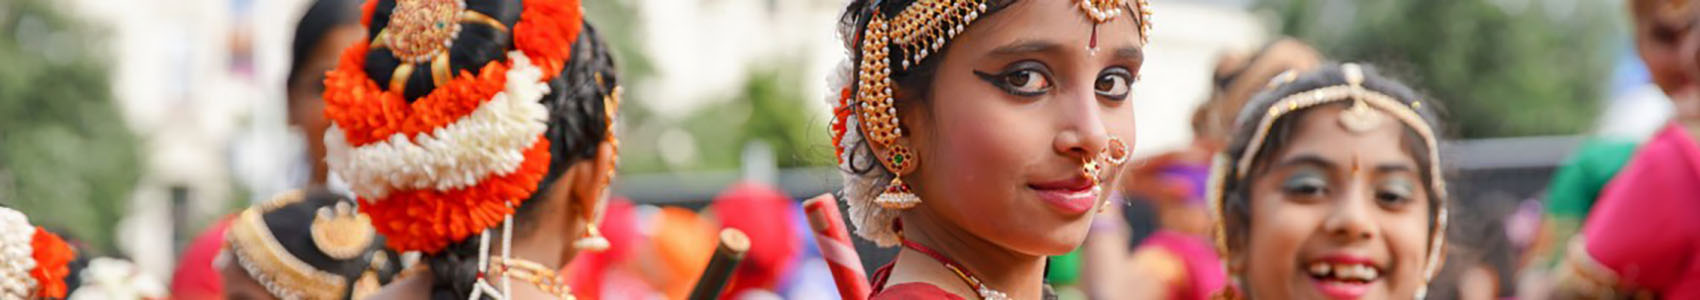 Auckland’s Diwali Festival celebrates its ‘21st’ and an exciting return to its traditional crowds